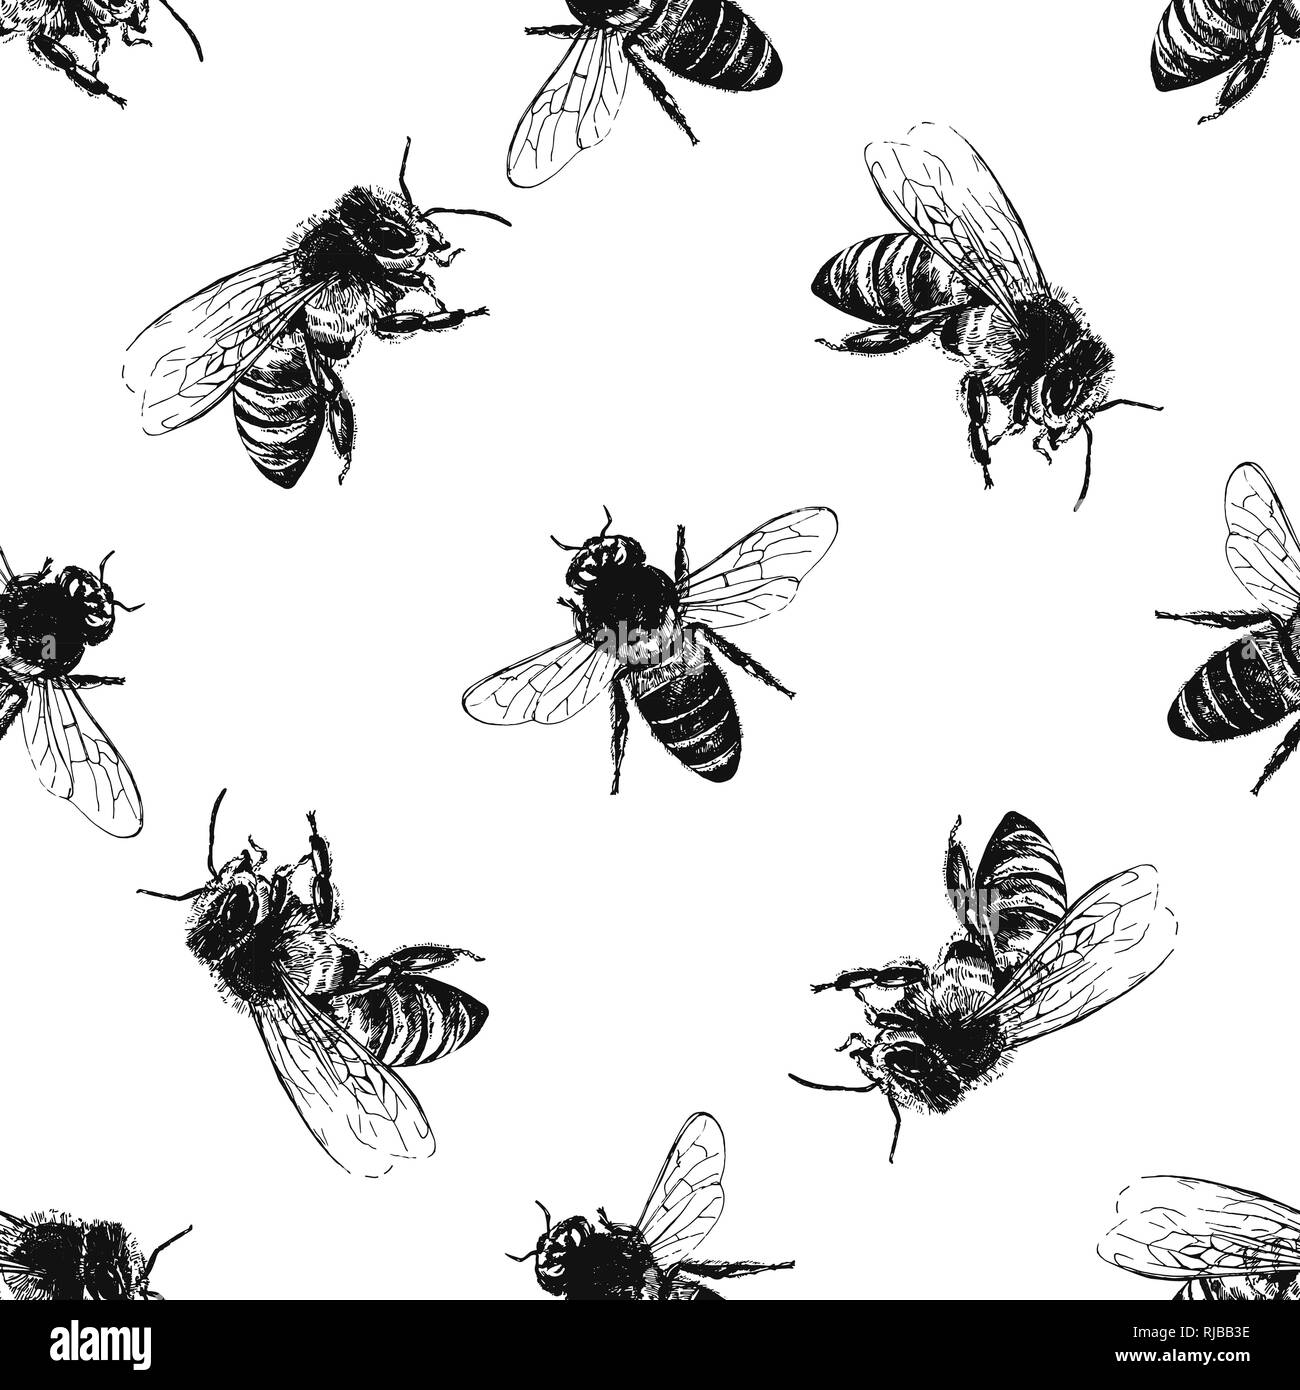 Seamless pattern of hand drawn sketch style bees isolated on white background. Vector illustration. Stock Vector